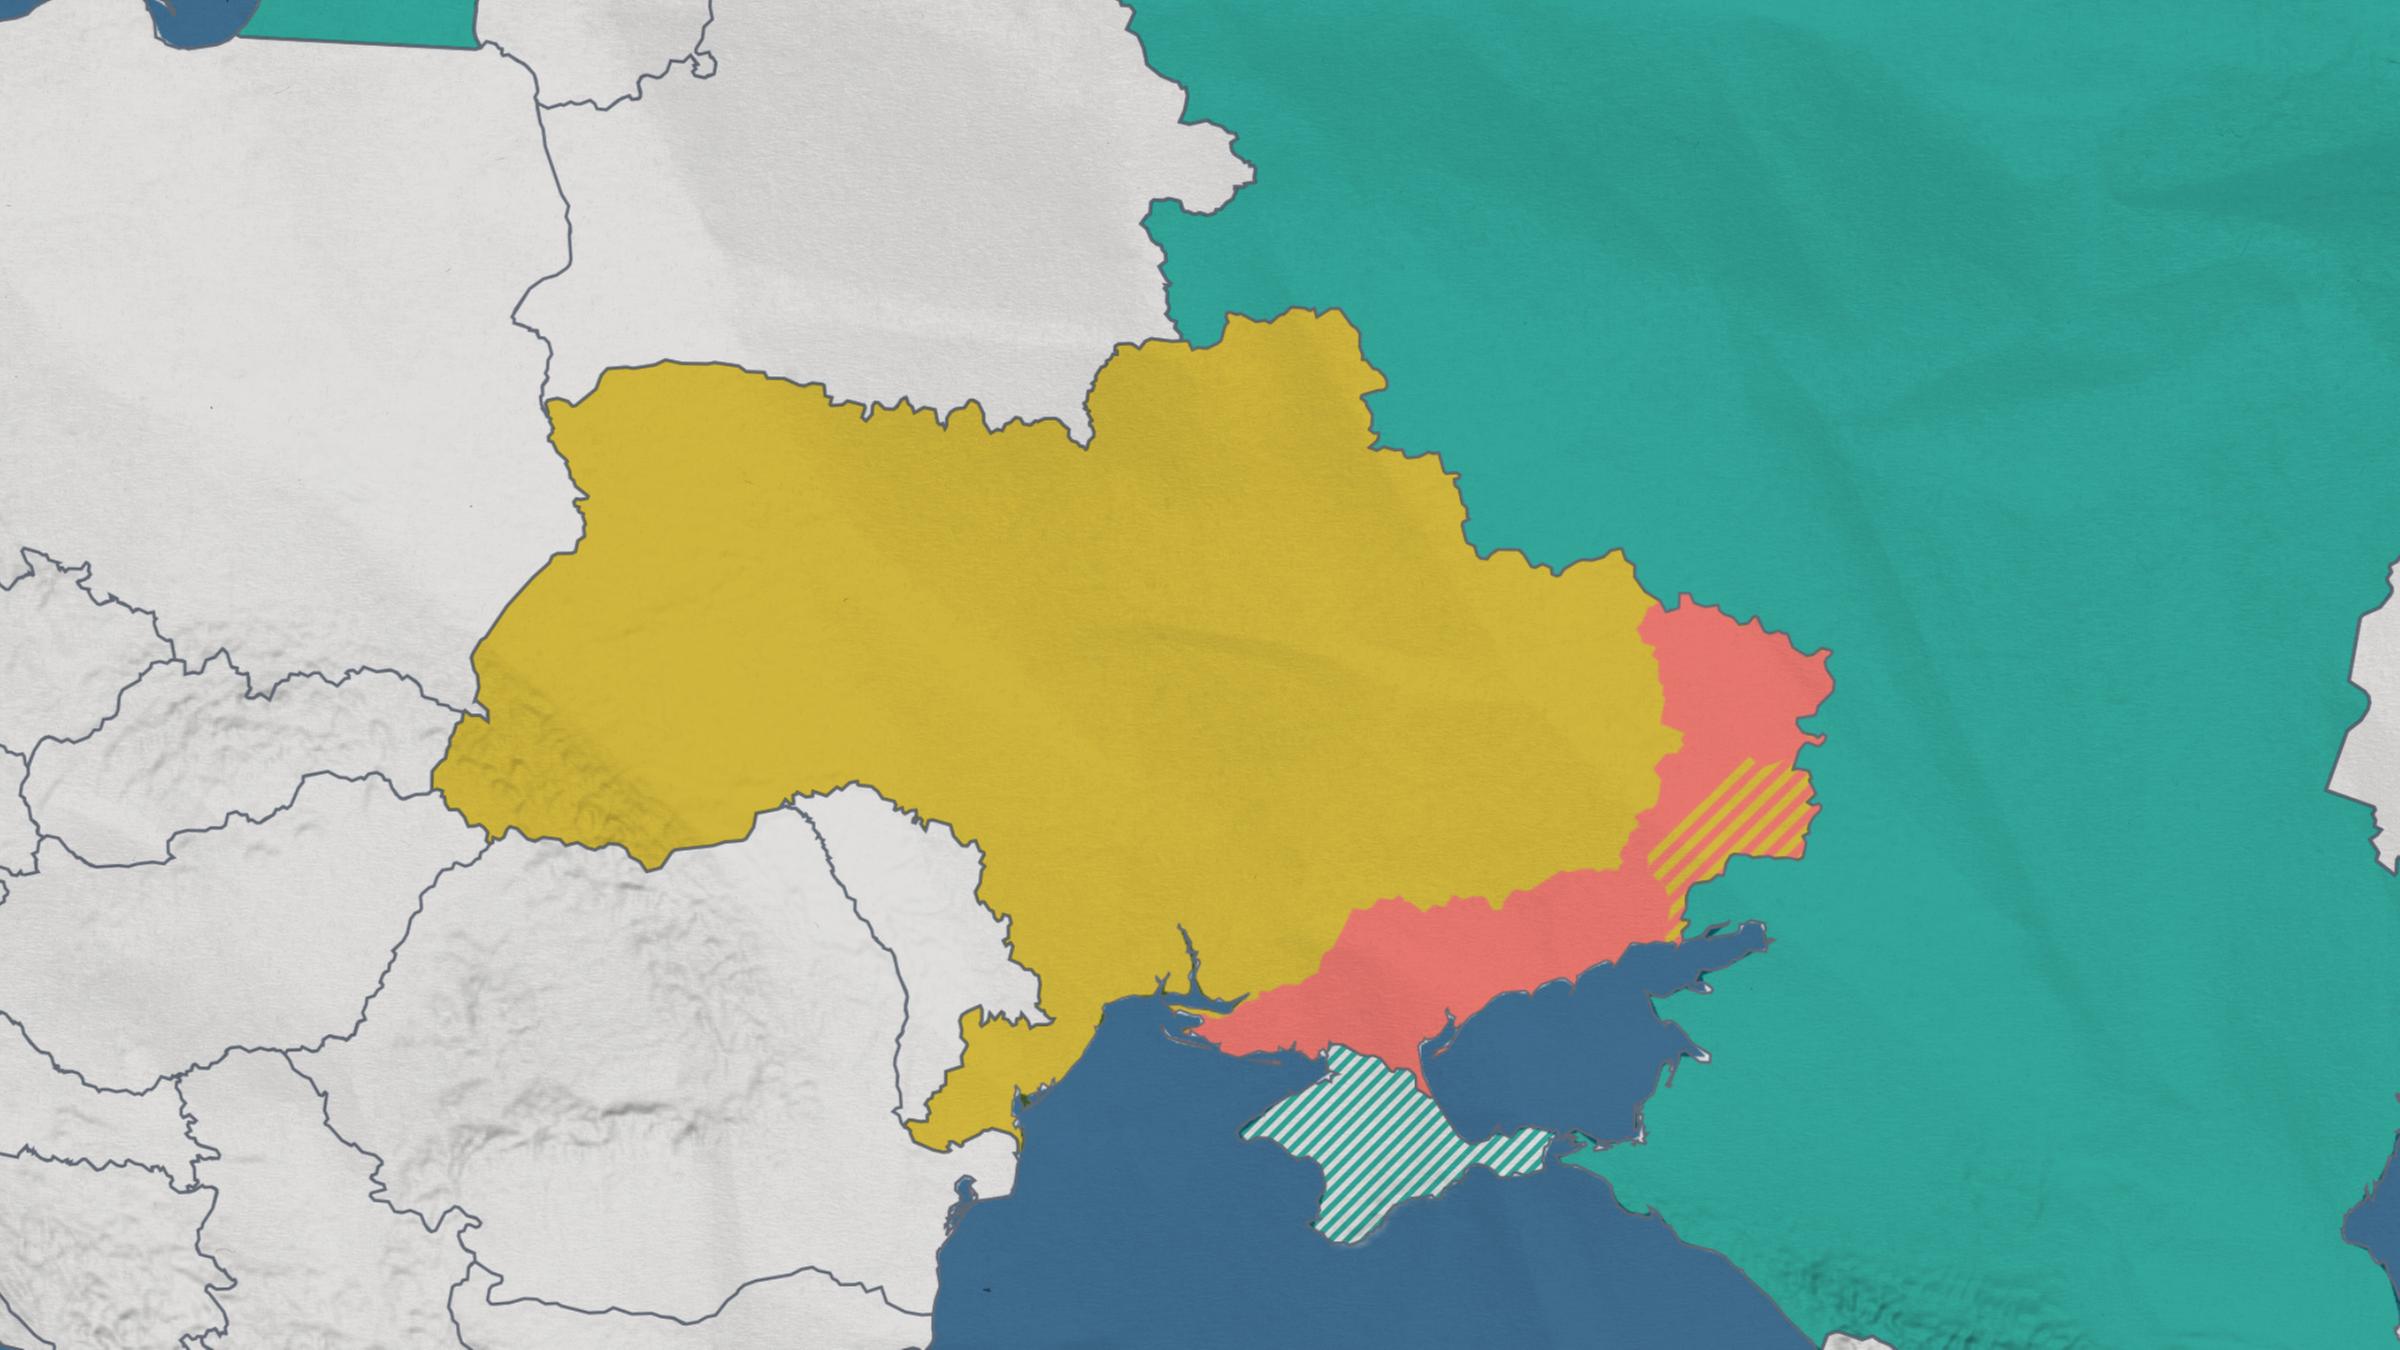 The map of Ukraine shows which regions in the east of the country are occupied by Russian troops.  Separatist regions and annexed Crimea are also highlighted. 